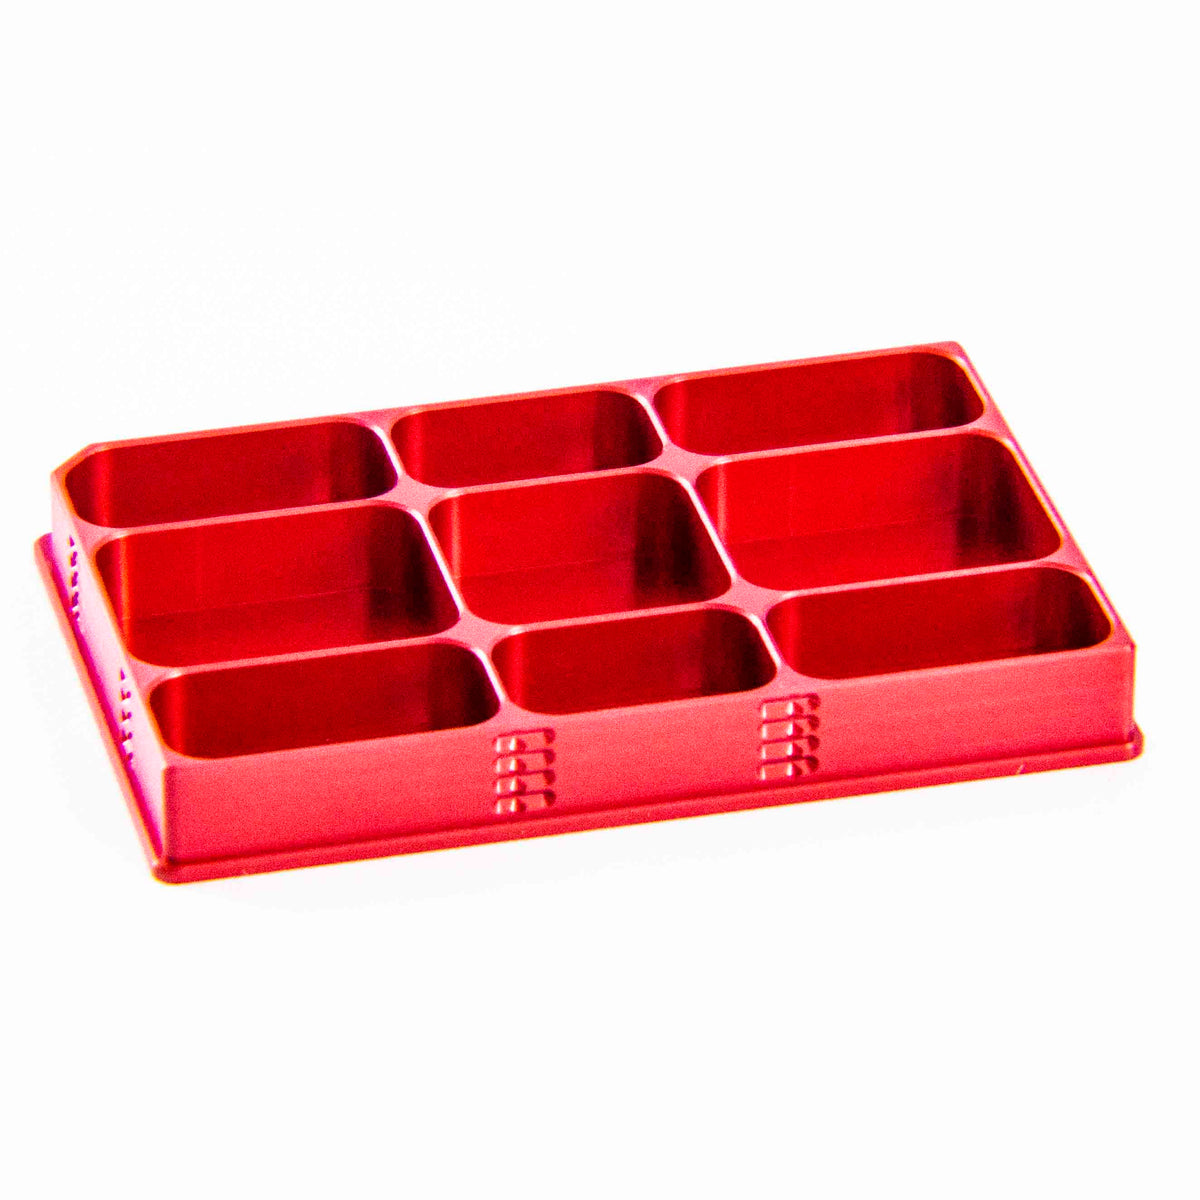 Tovolo King Cube Silicone Ice Tray, Red